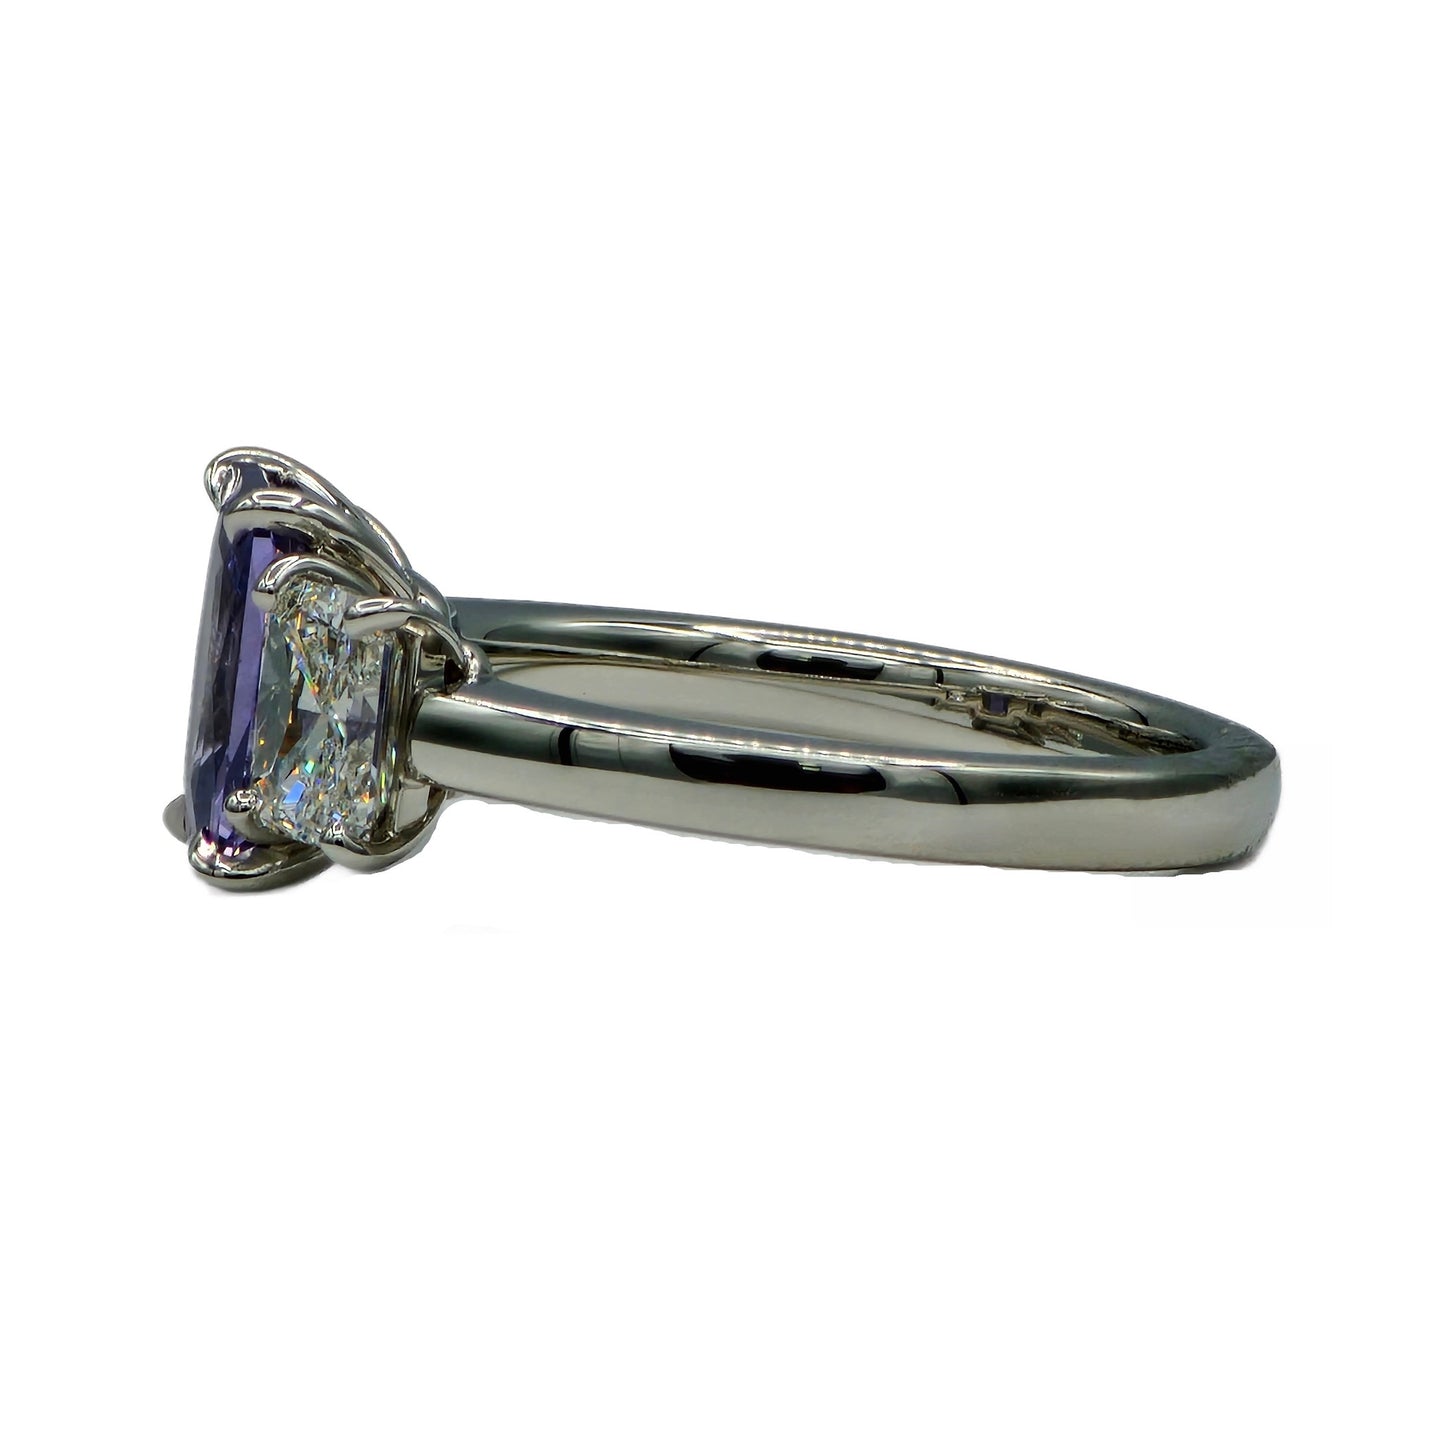 2 Carat Radiant Cut Unheated Violet Sapphire and Diamond Ring in Platinum, GIA Report